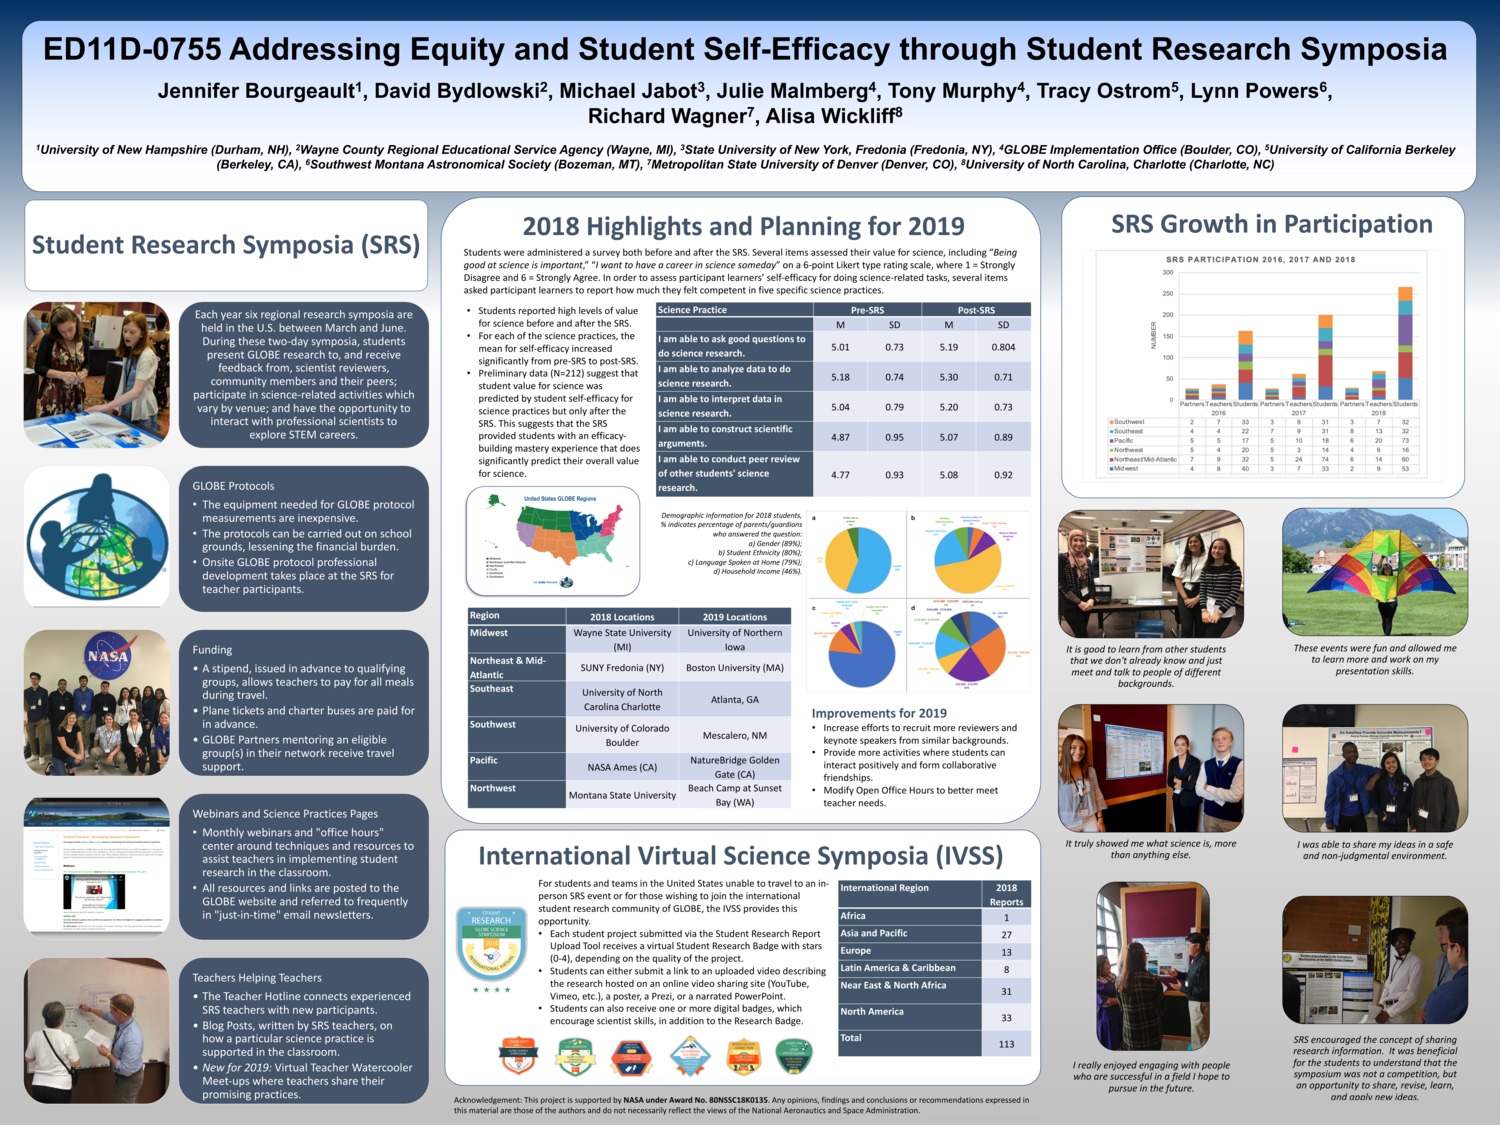 Addressing Equity And Student Self-Efficacy Through Student Research Symposia by jlhagen